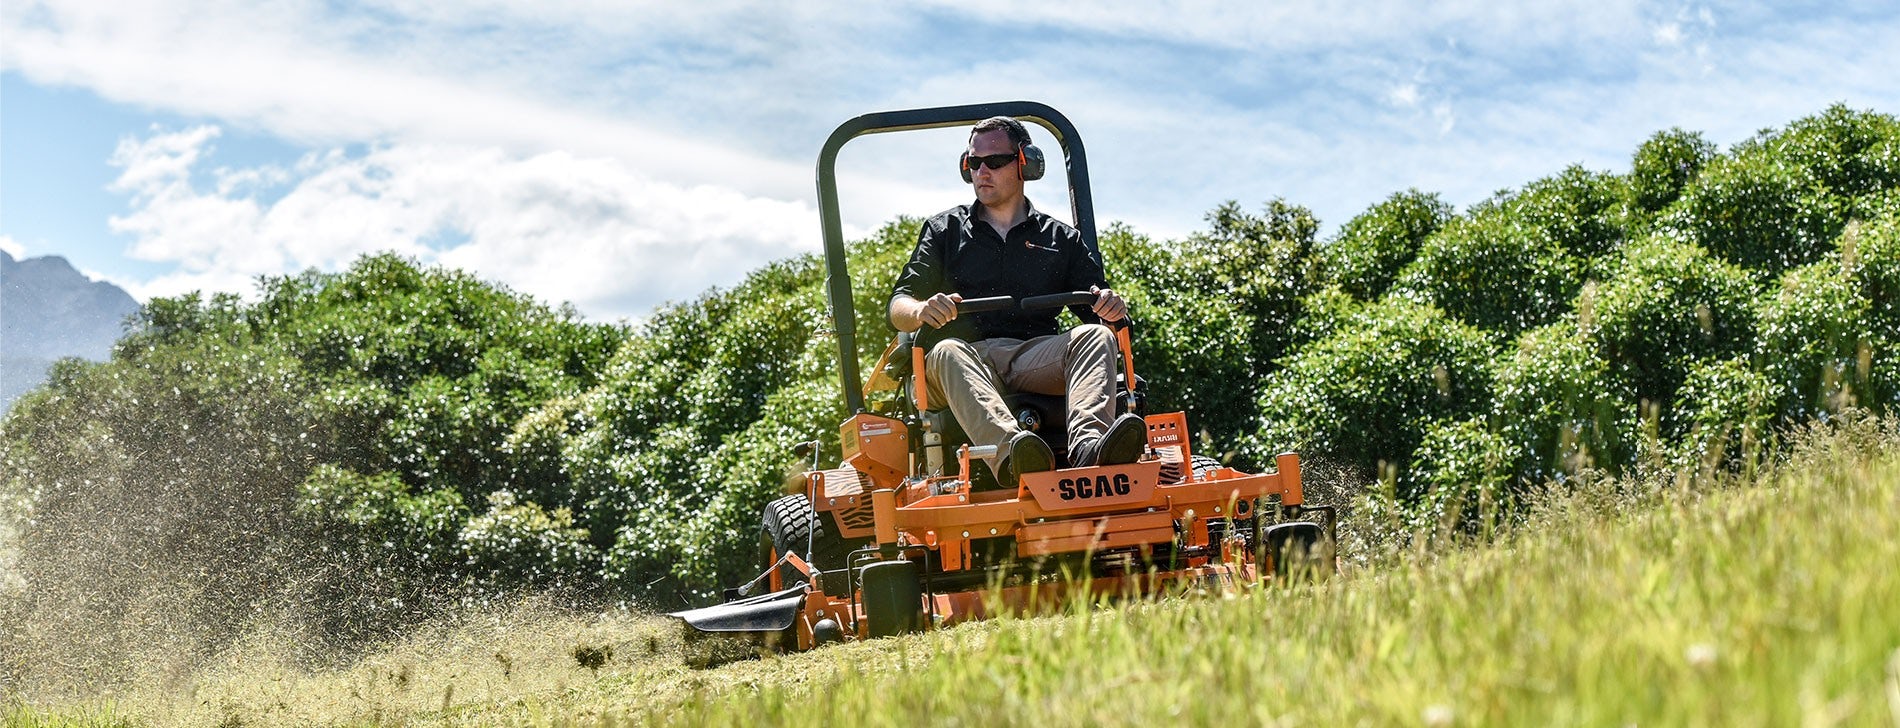 Man mowing with a Scag zero turn mower